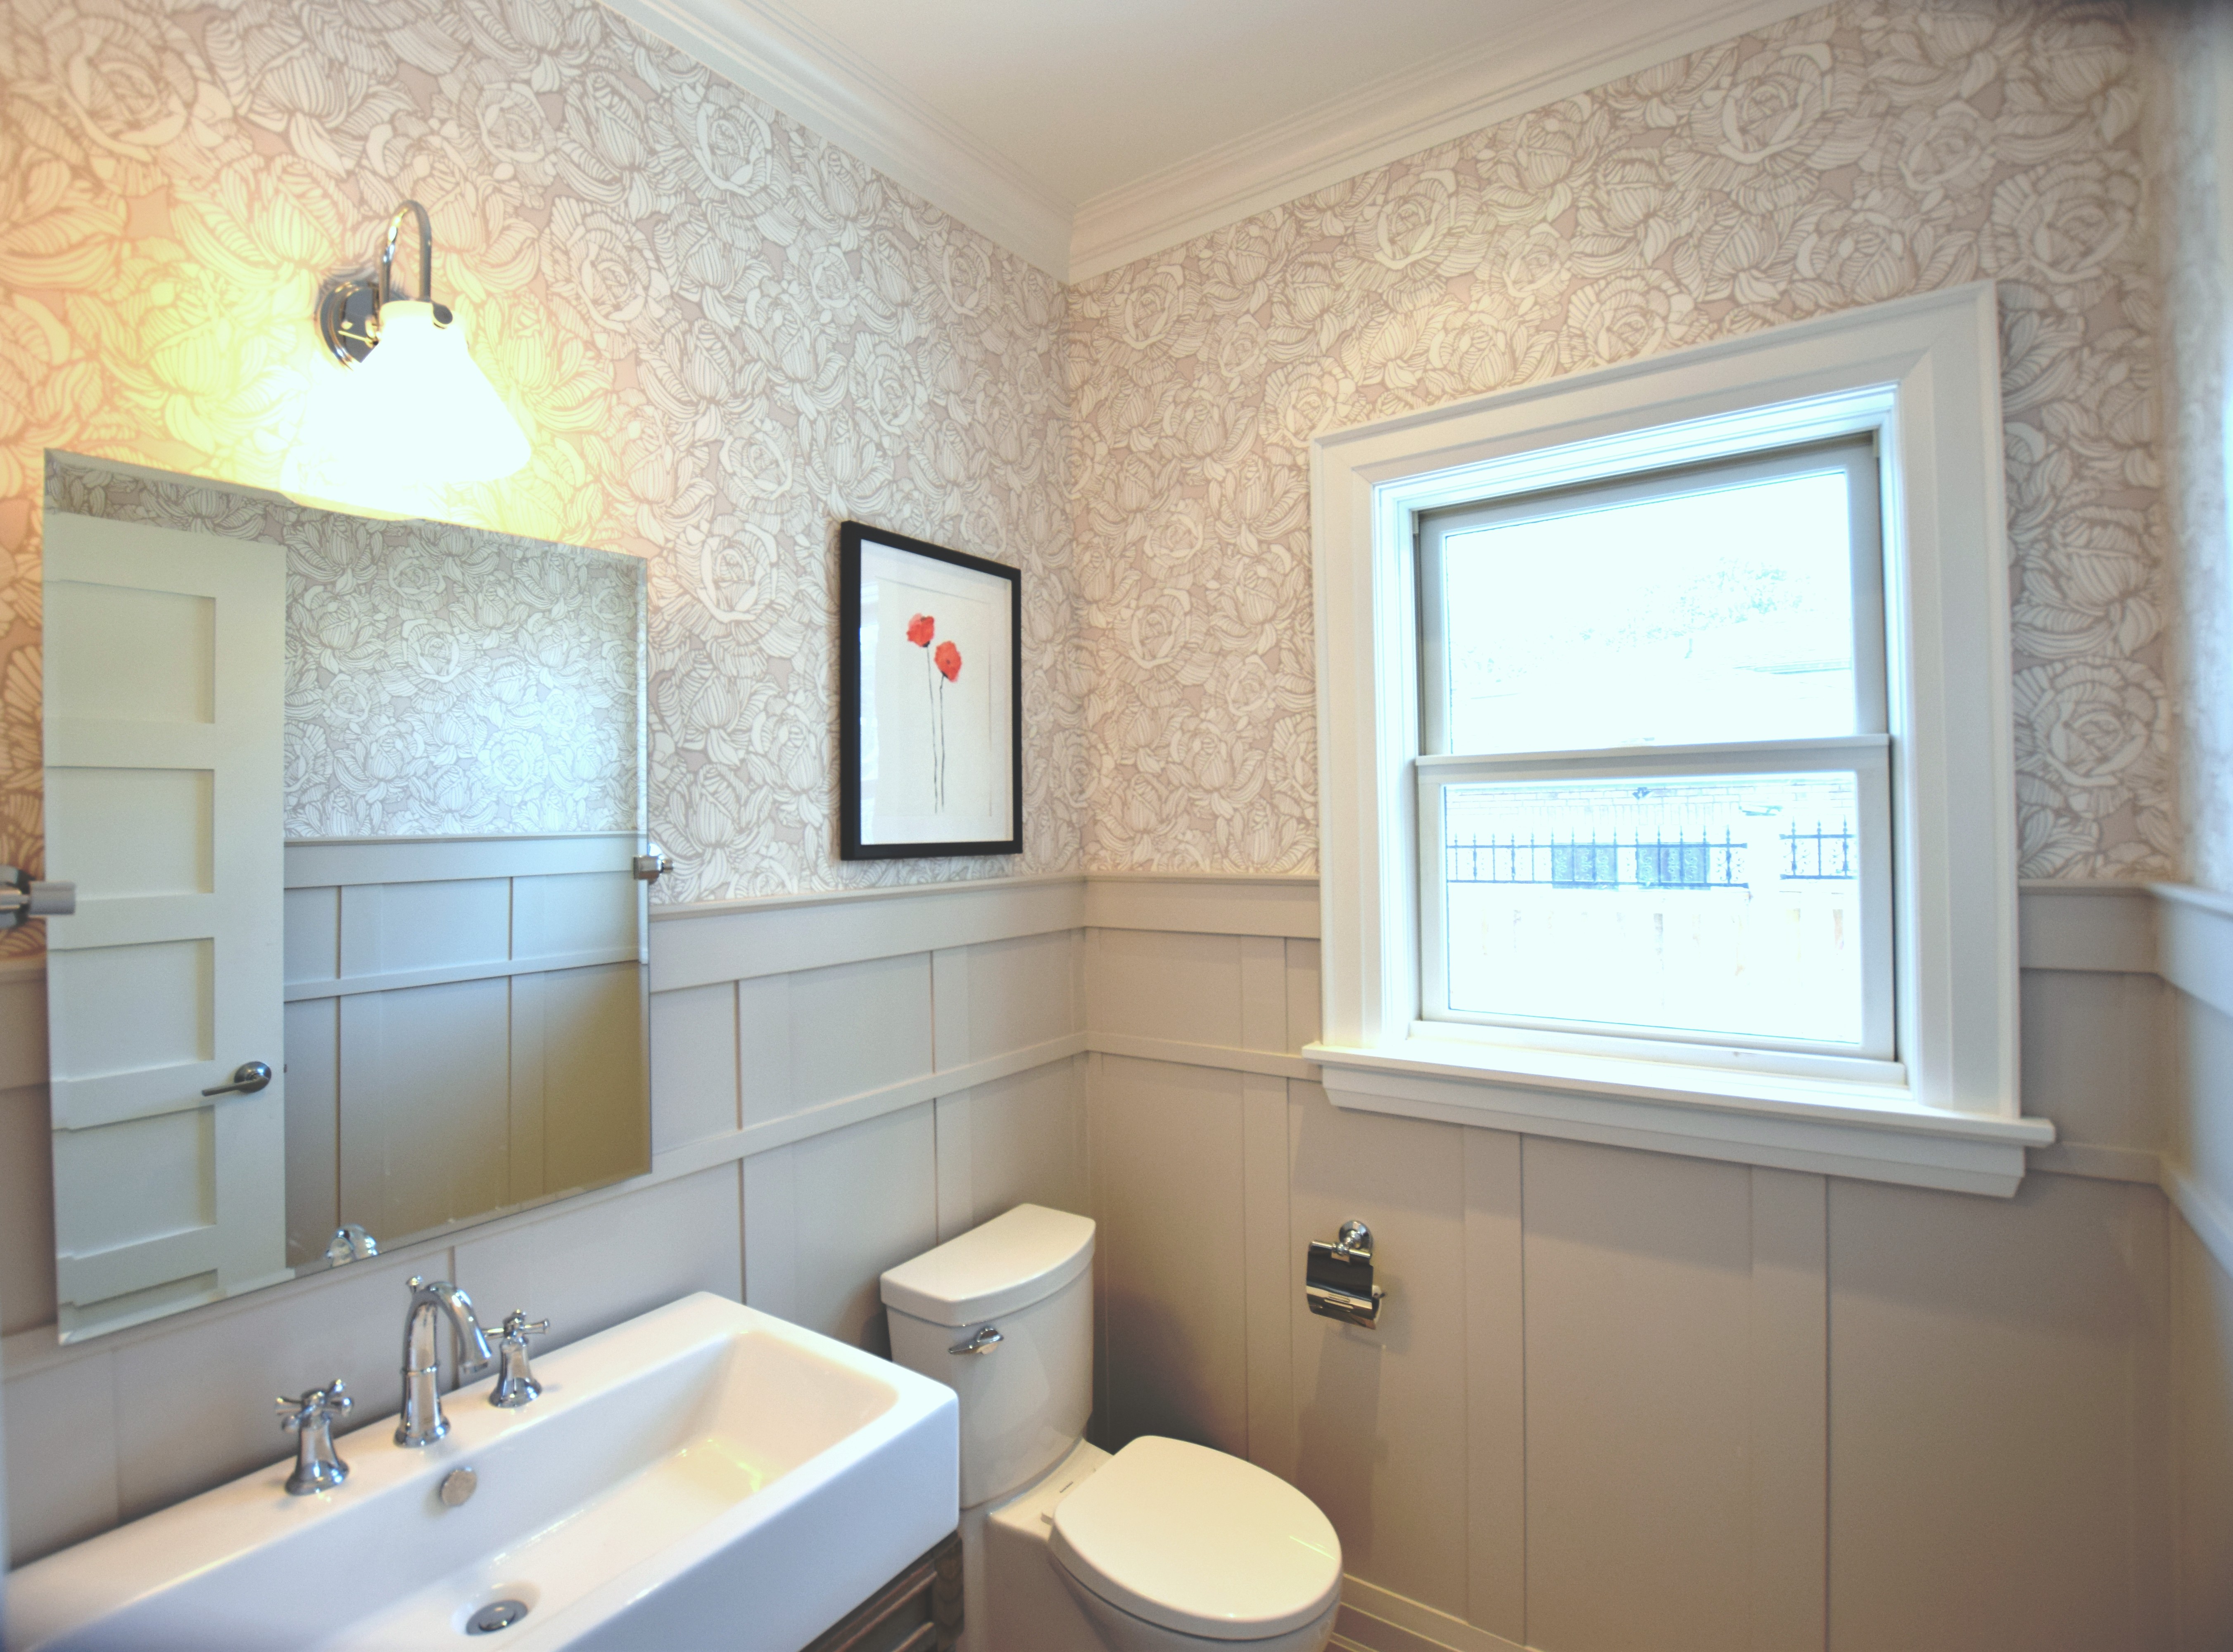 Powder Room with Wainscotting